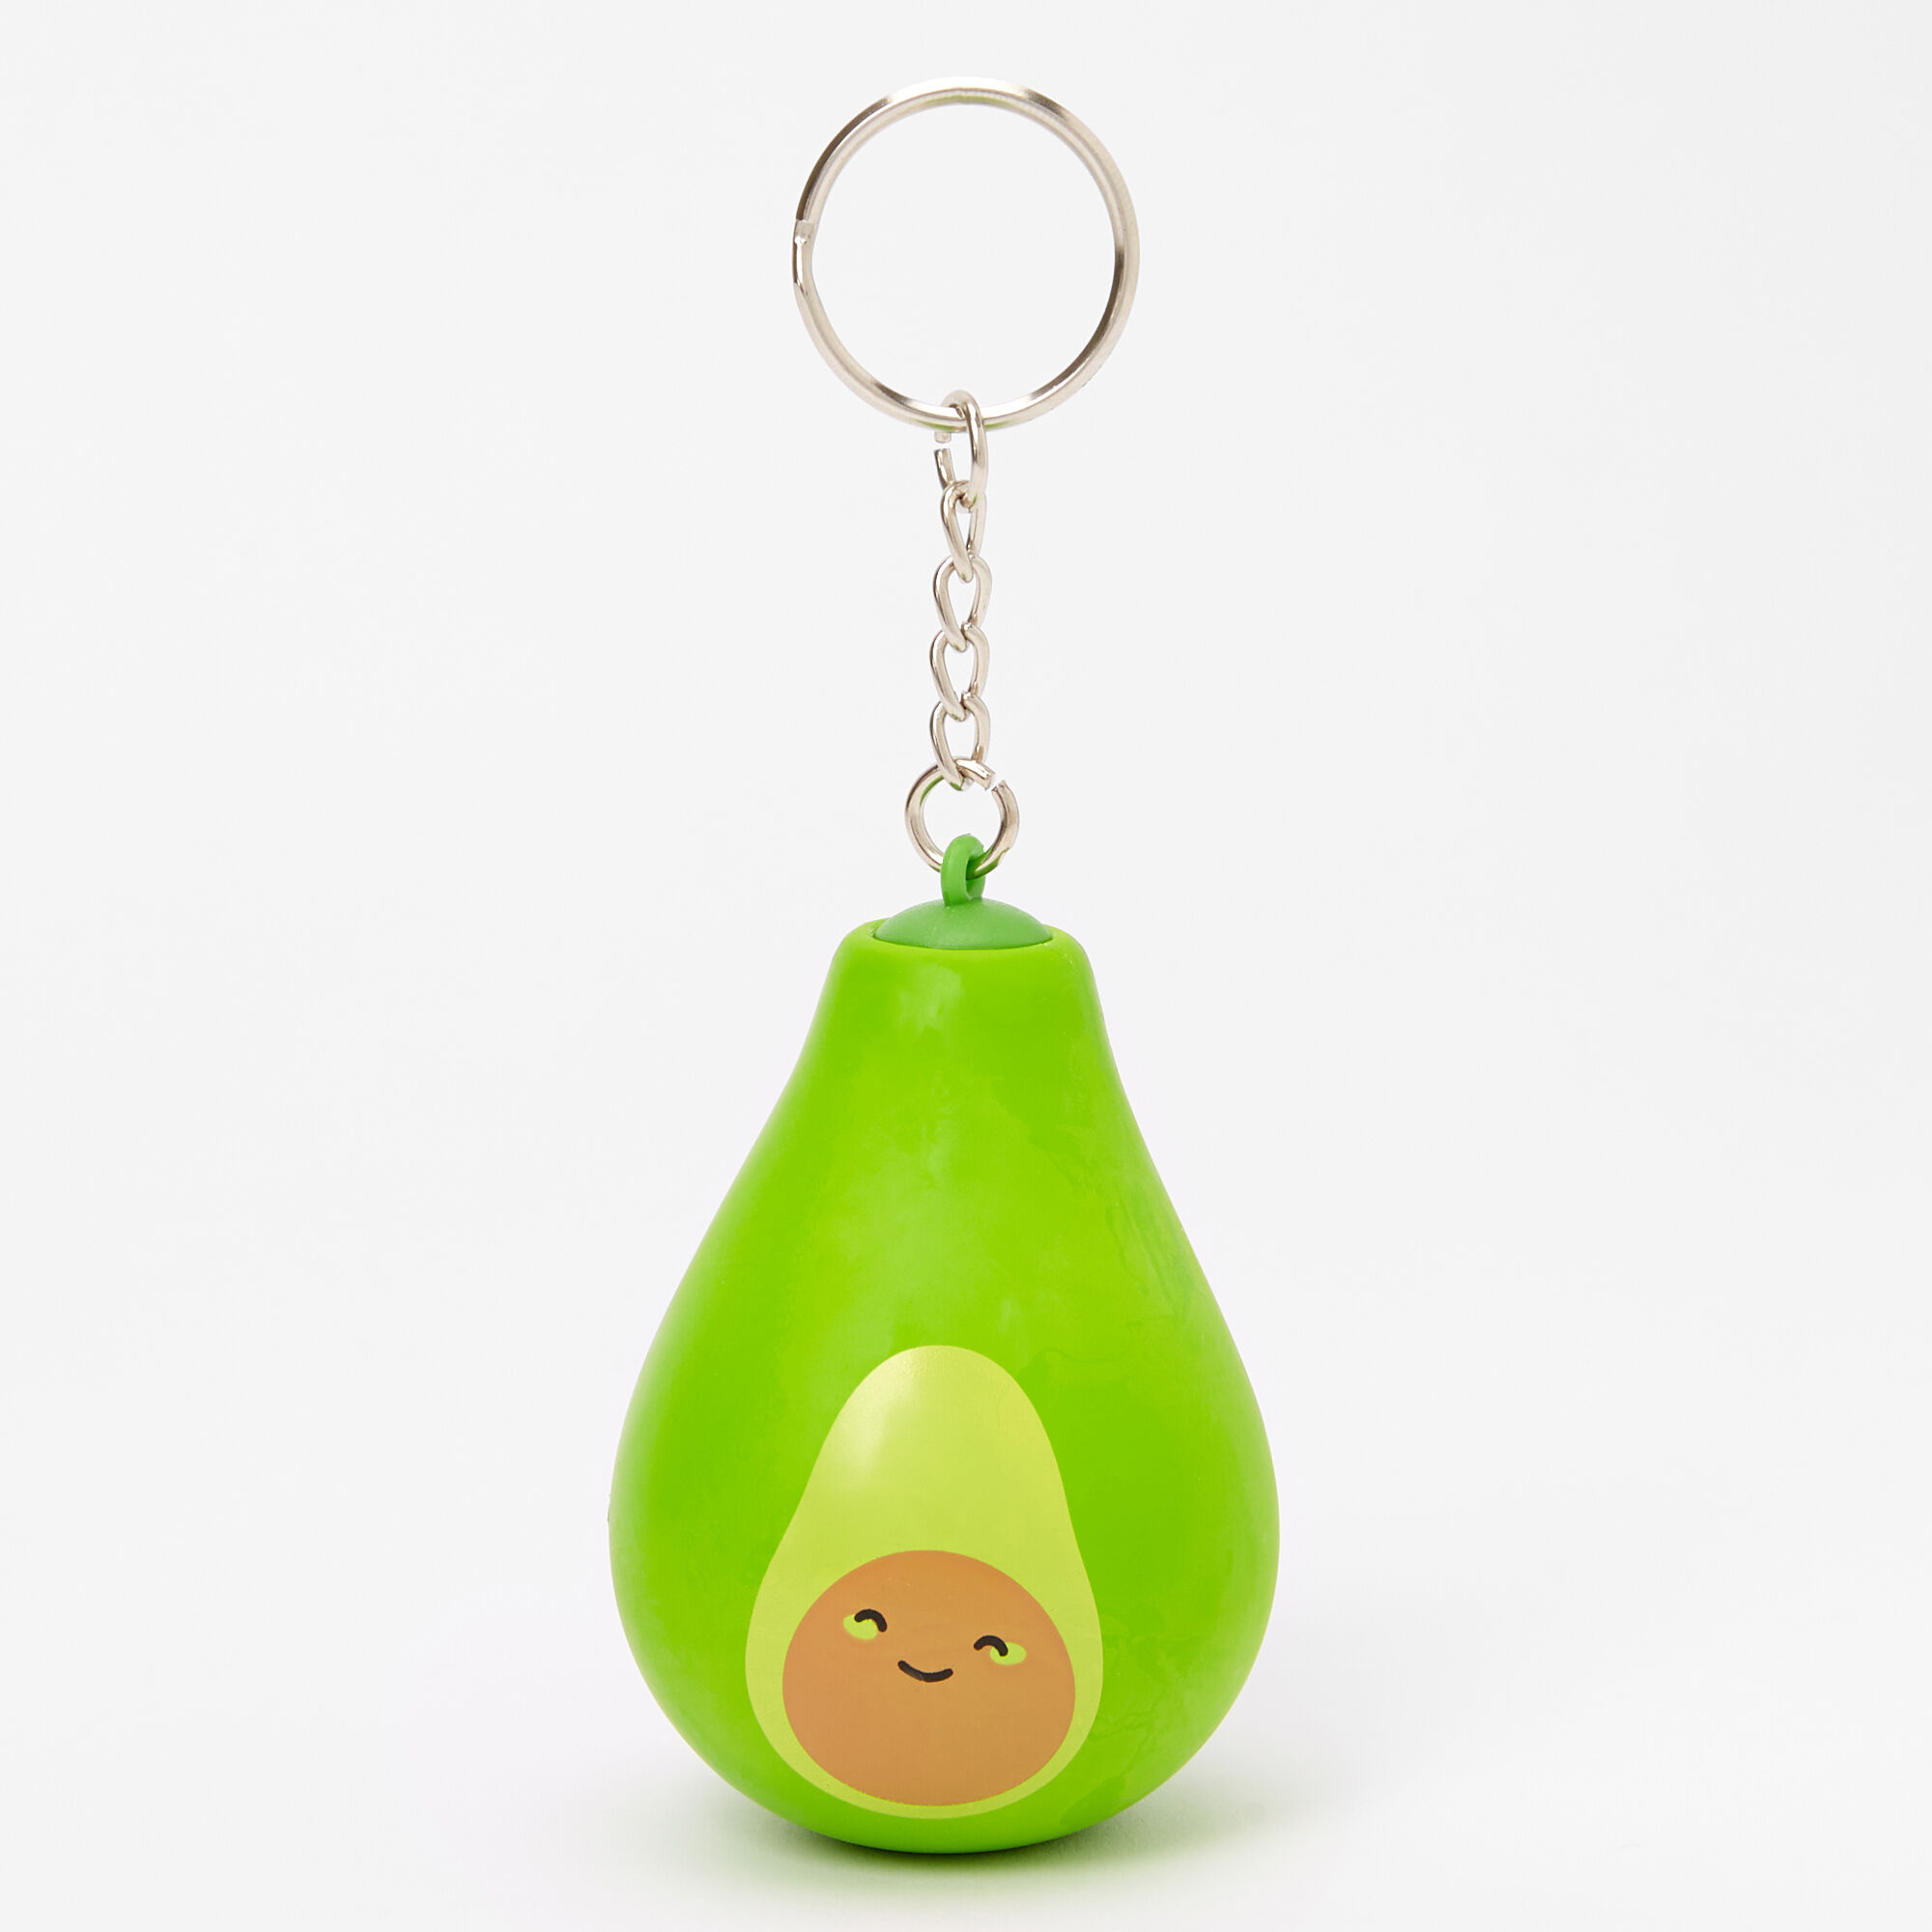 View Claires Avocado Stress Ball Keychain Green information